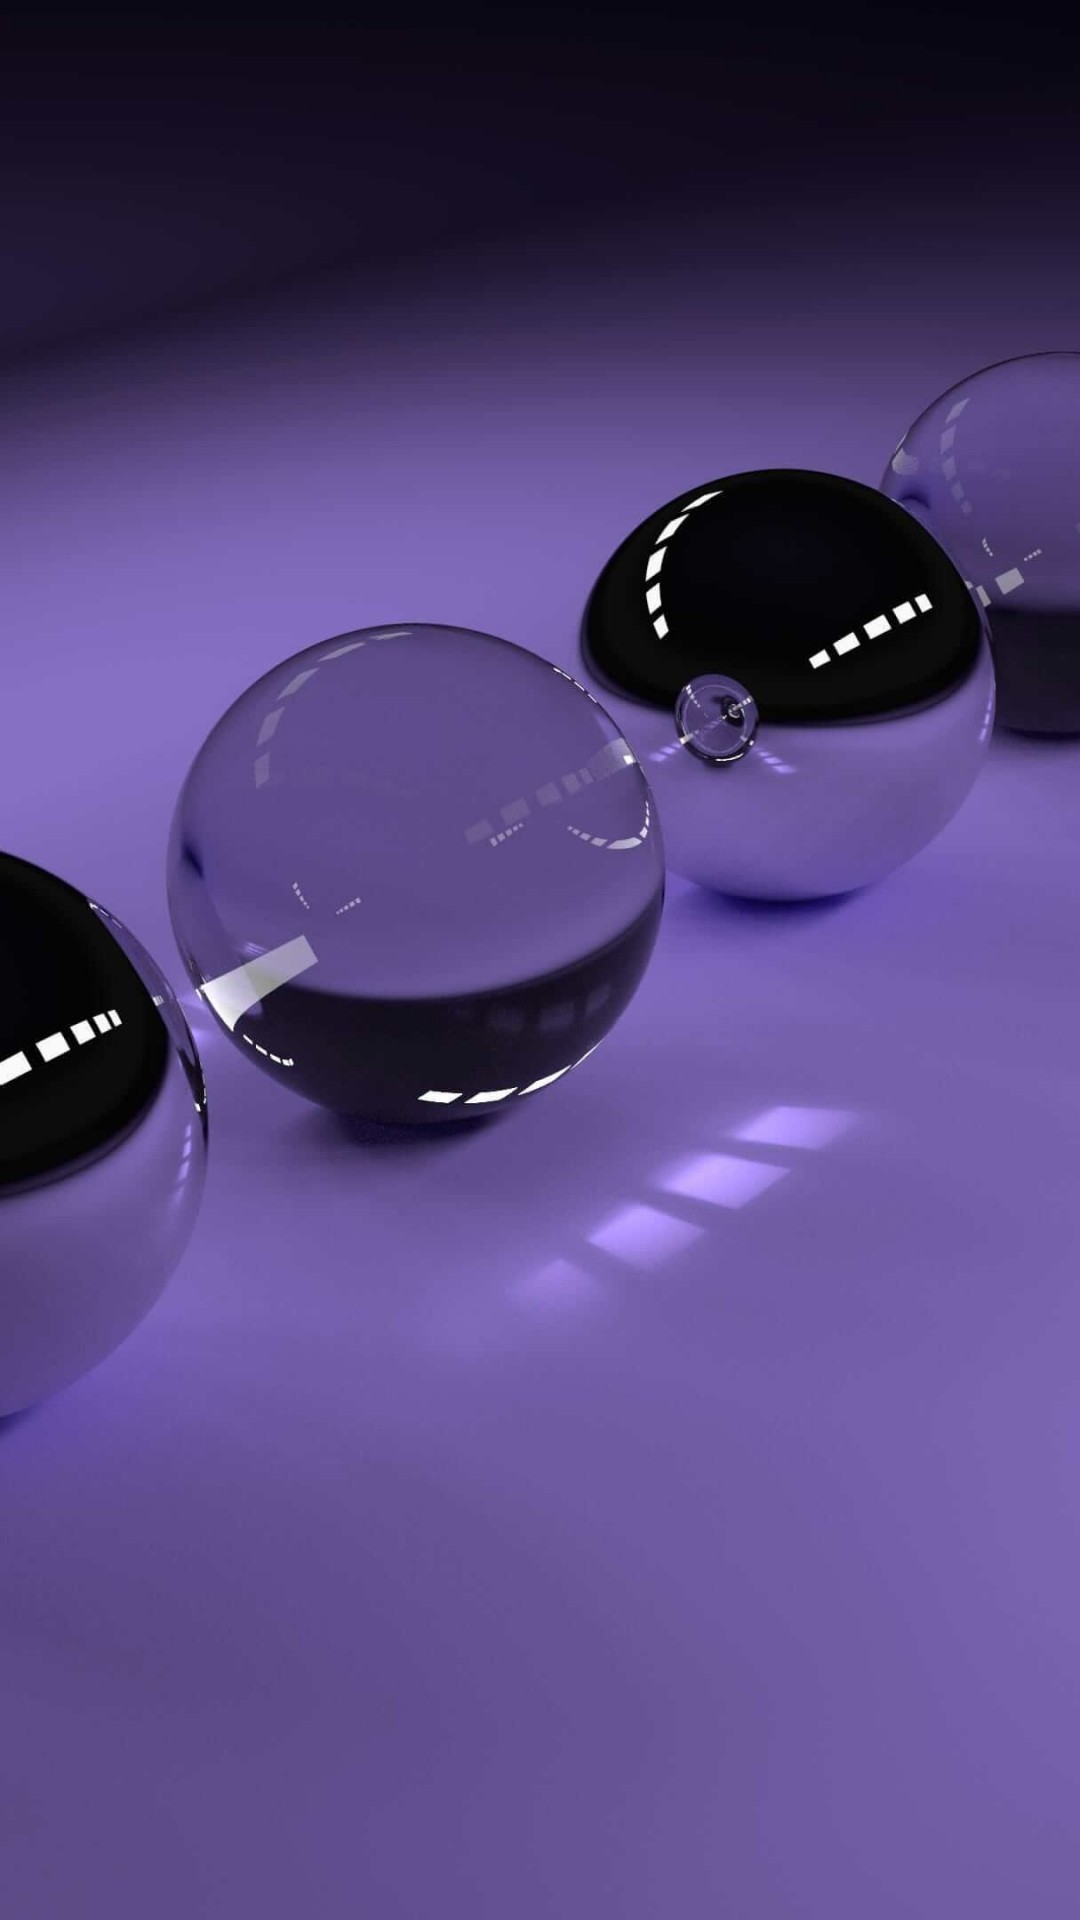 3D Glossy Spheres Wallpaper for SAMSUNG Galaxy Note 3